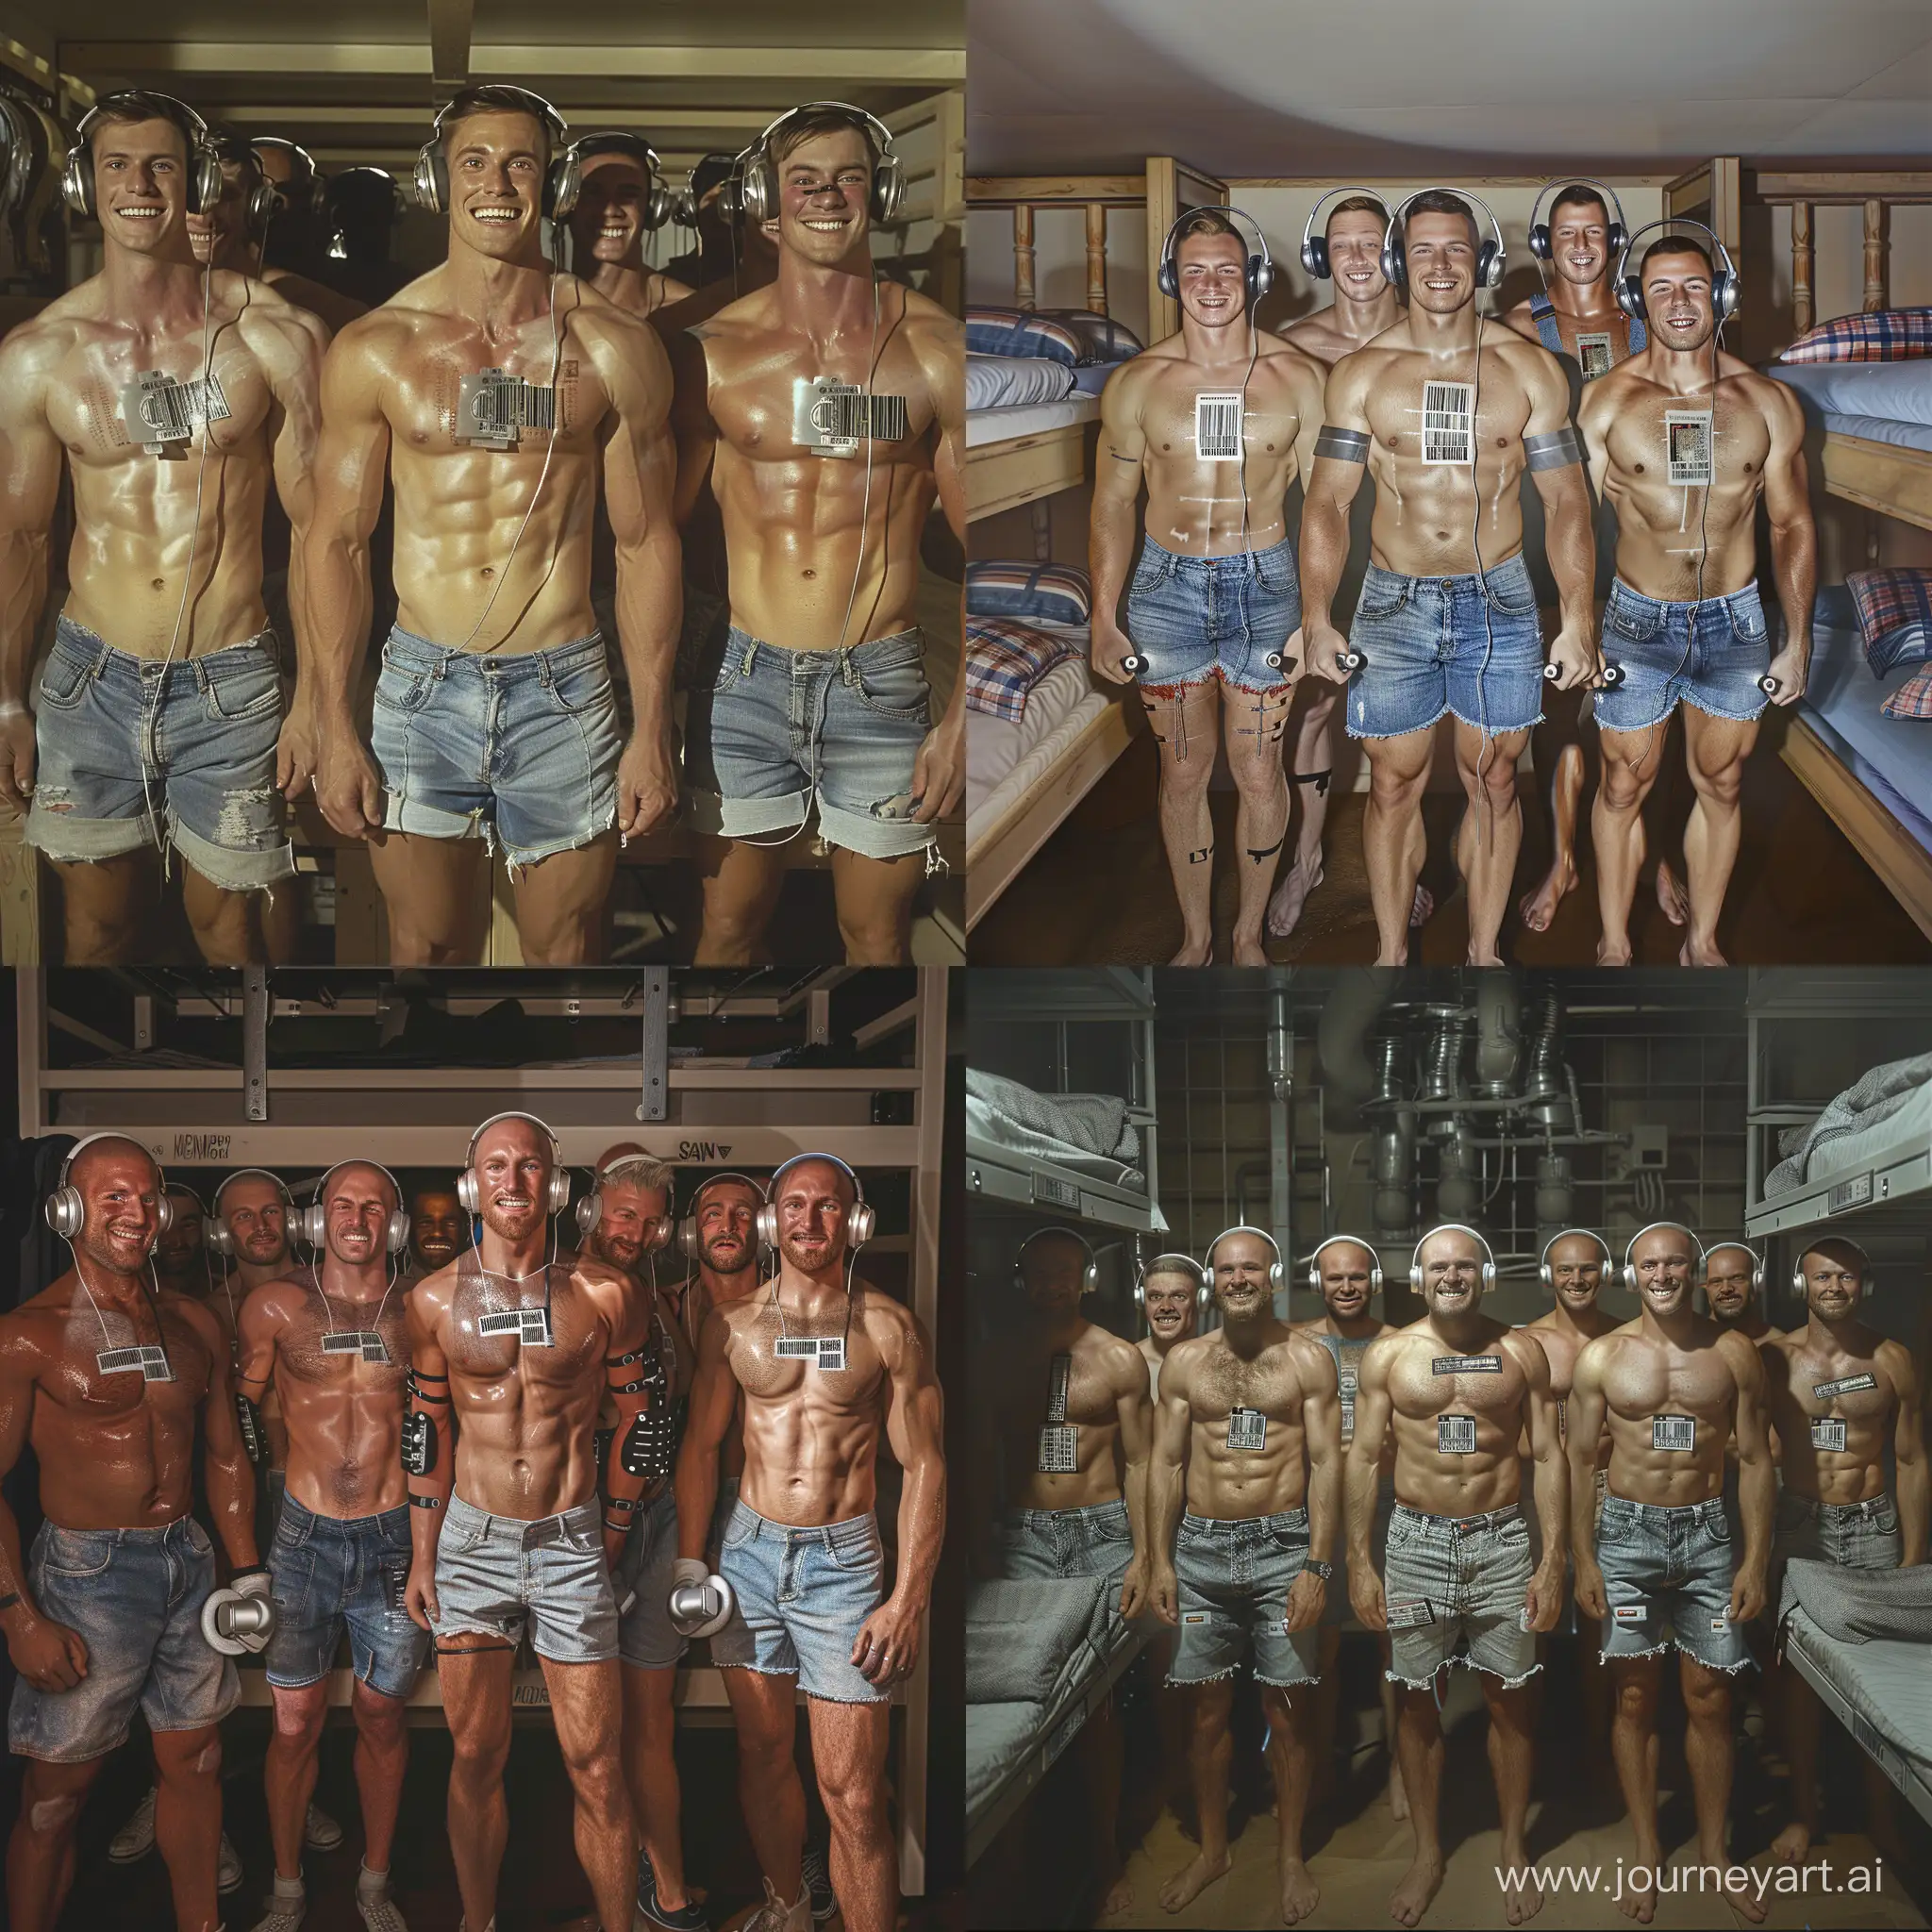 Muscular-Men-in-Denim-Shorts-with-Barcode-Tags-in-Youth-Hostel-Dormitory